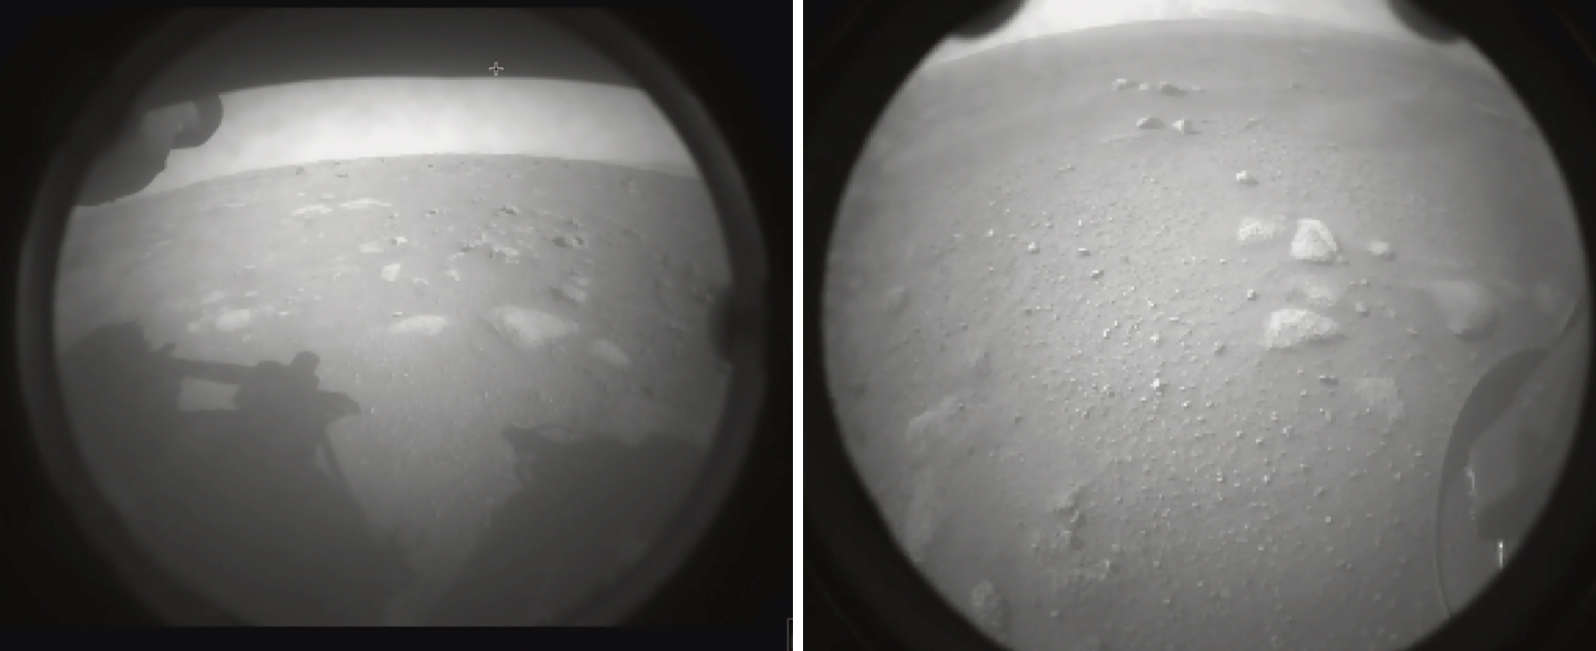 The first images from NASA's Perseverance rover moments after landing successfully on Mars. The very 1st image (left) shows the landscape around the rover and its shadow, and the 2nd (right) shows a little bit closer to the rover. Credit: NASA/JPL-Caltech